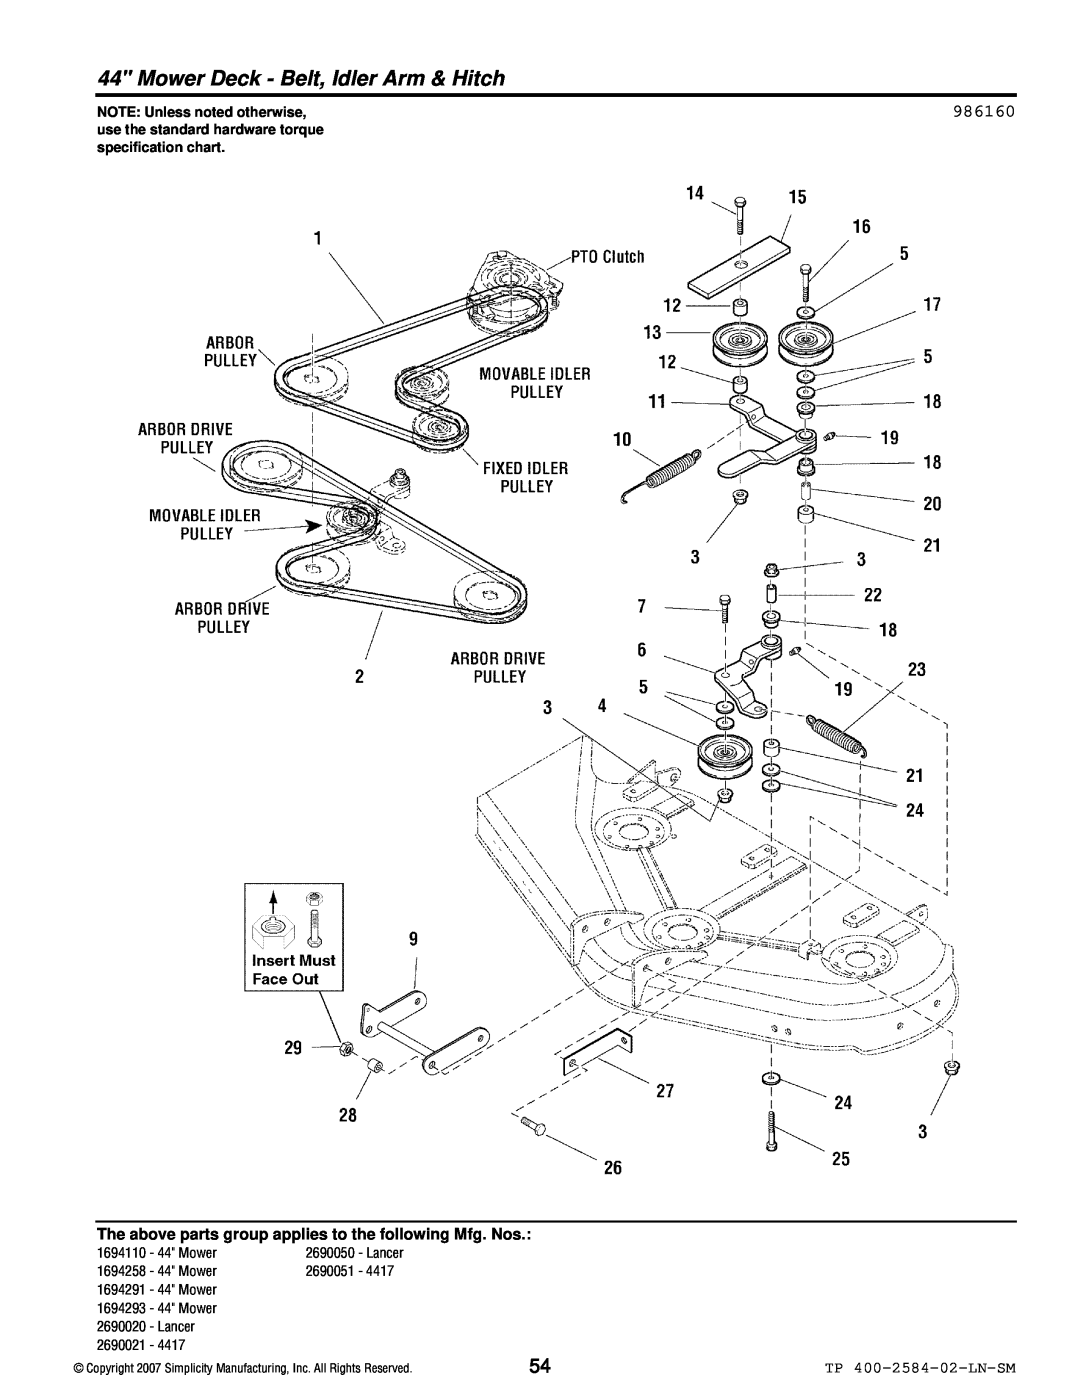 Simplicity Lancer / 4400 Mower Deck - Belt, Idler Arm & Hitch, 986160, TP 400-2584-02-LN-SM, NOTE: Unless noted otherwise 